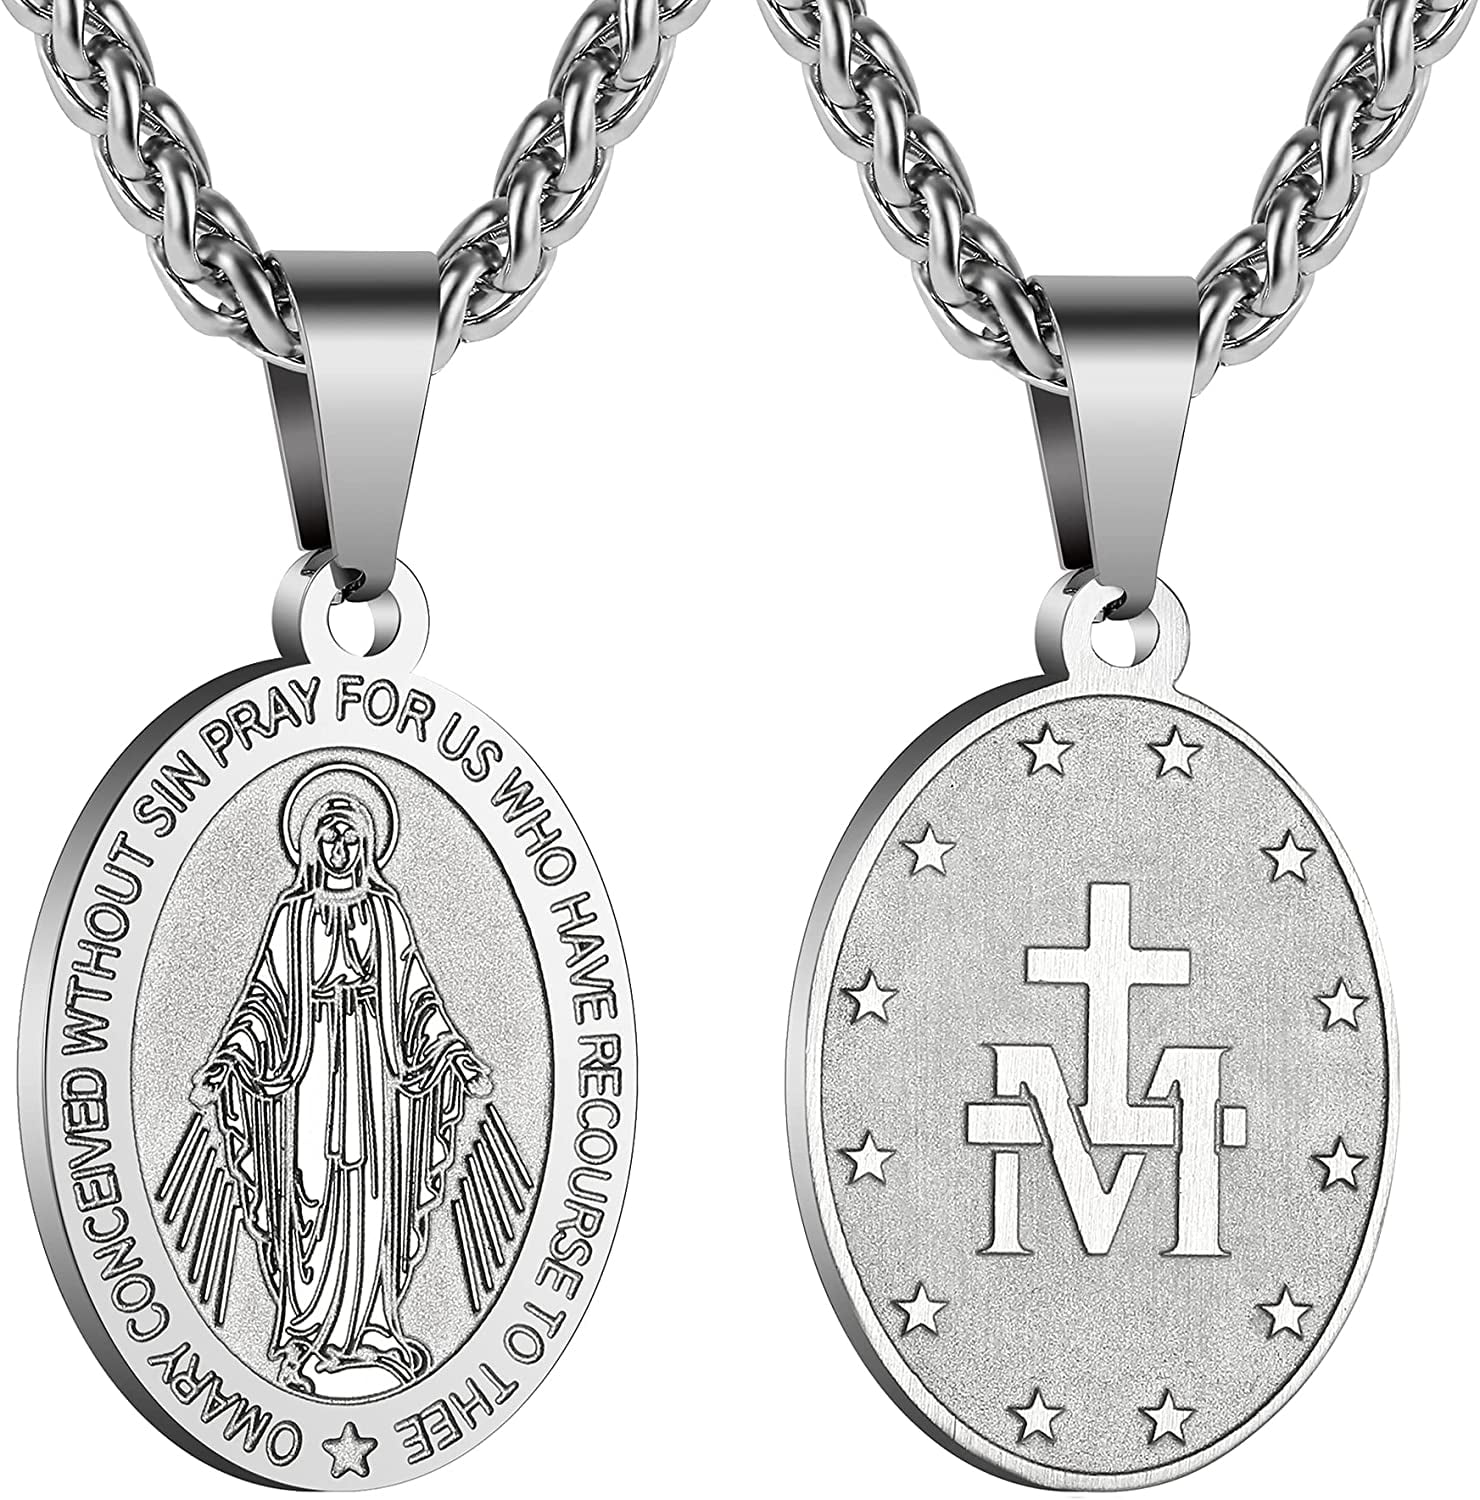 Weddinen Virgin Mary Necklace for Men Boys Stainless Steel Jewelry Miraculous Medal Pendant Chain Holy Mother Maria Necklace Religious Gift Silver bb241f53 aee1 421c a251 907e24ca19b0.4c81ab8af8f476e6c69299ed78a395f4